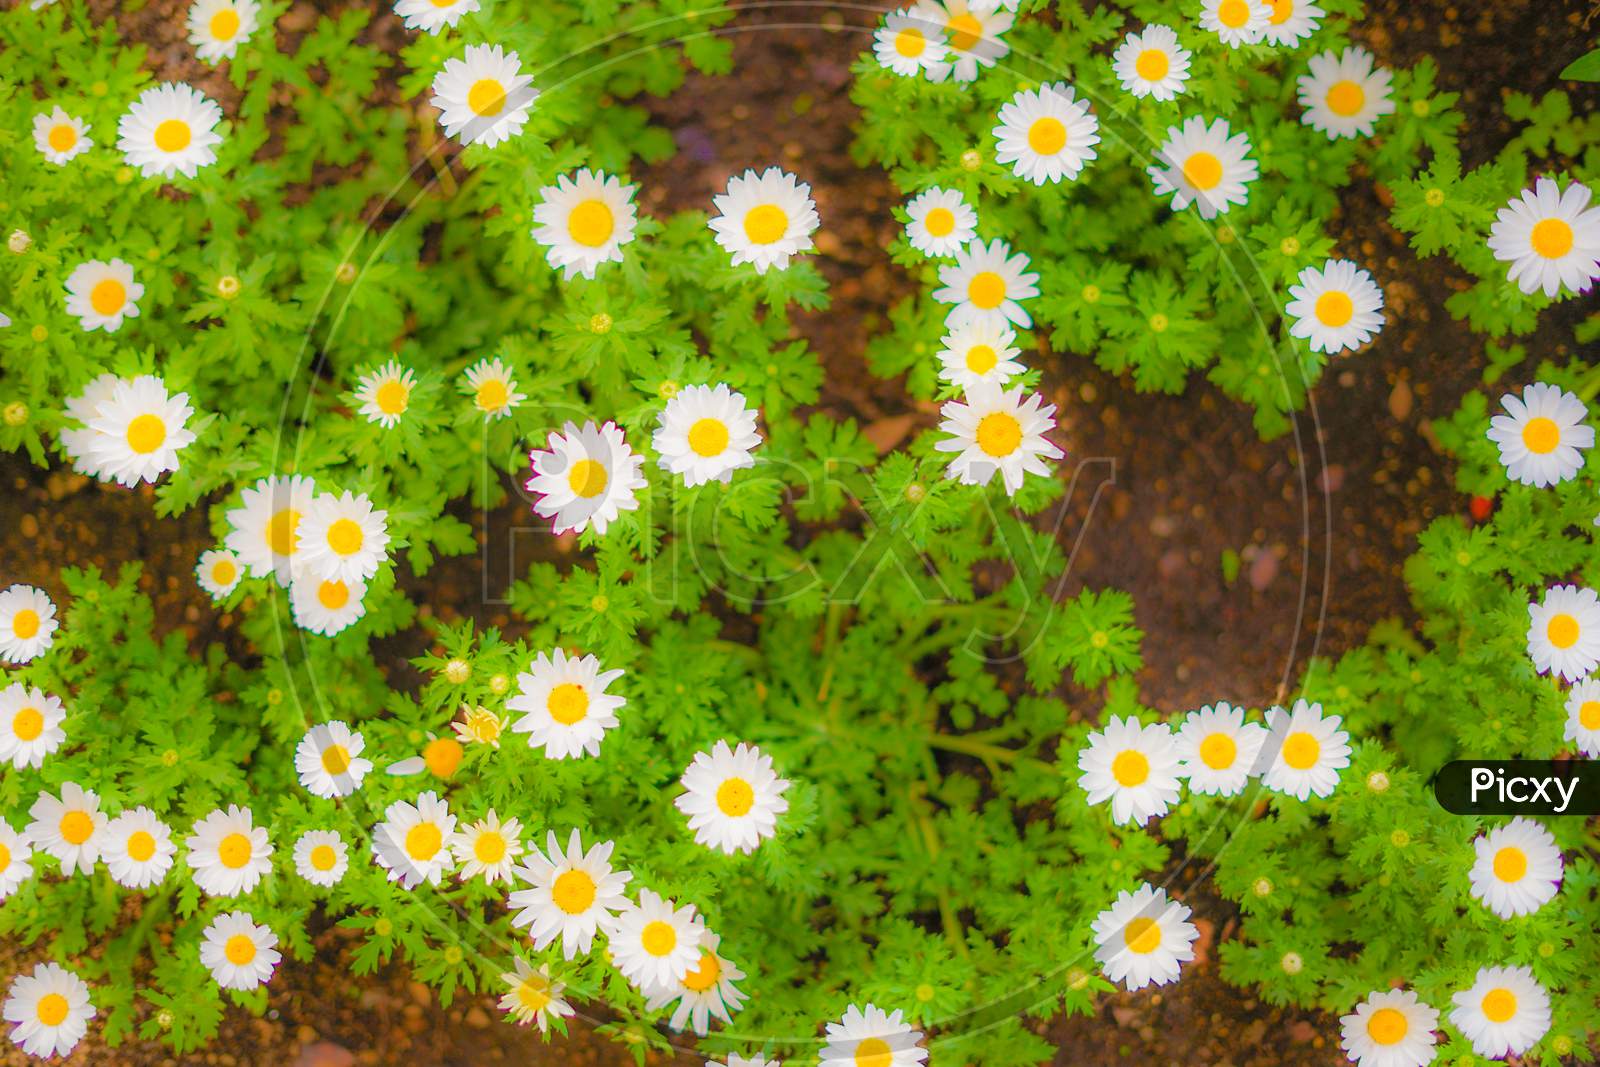 Colorful Daisy Of The Image (For Wallpaper)